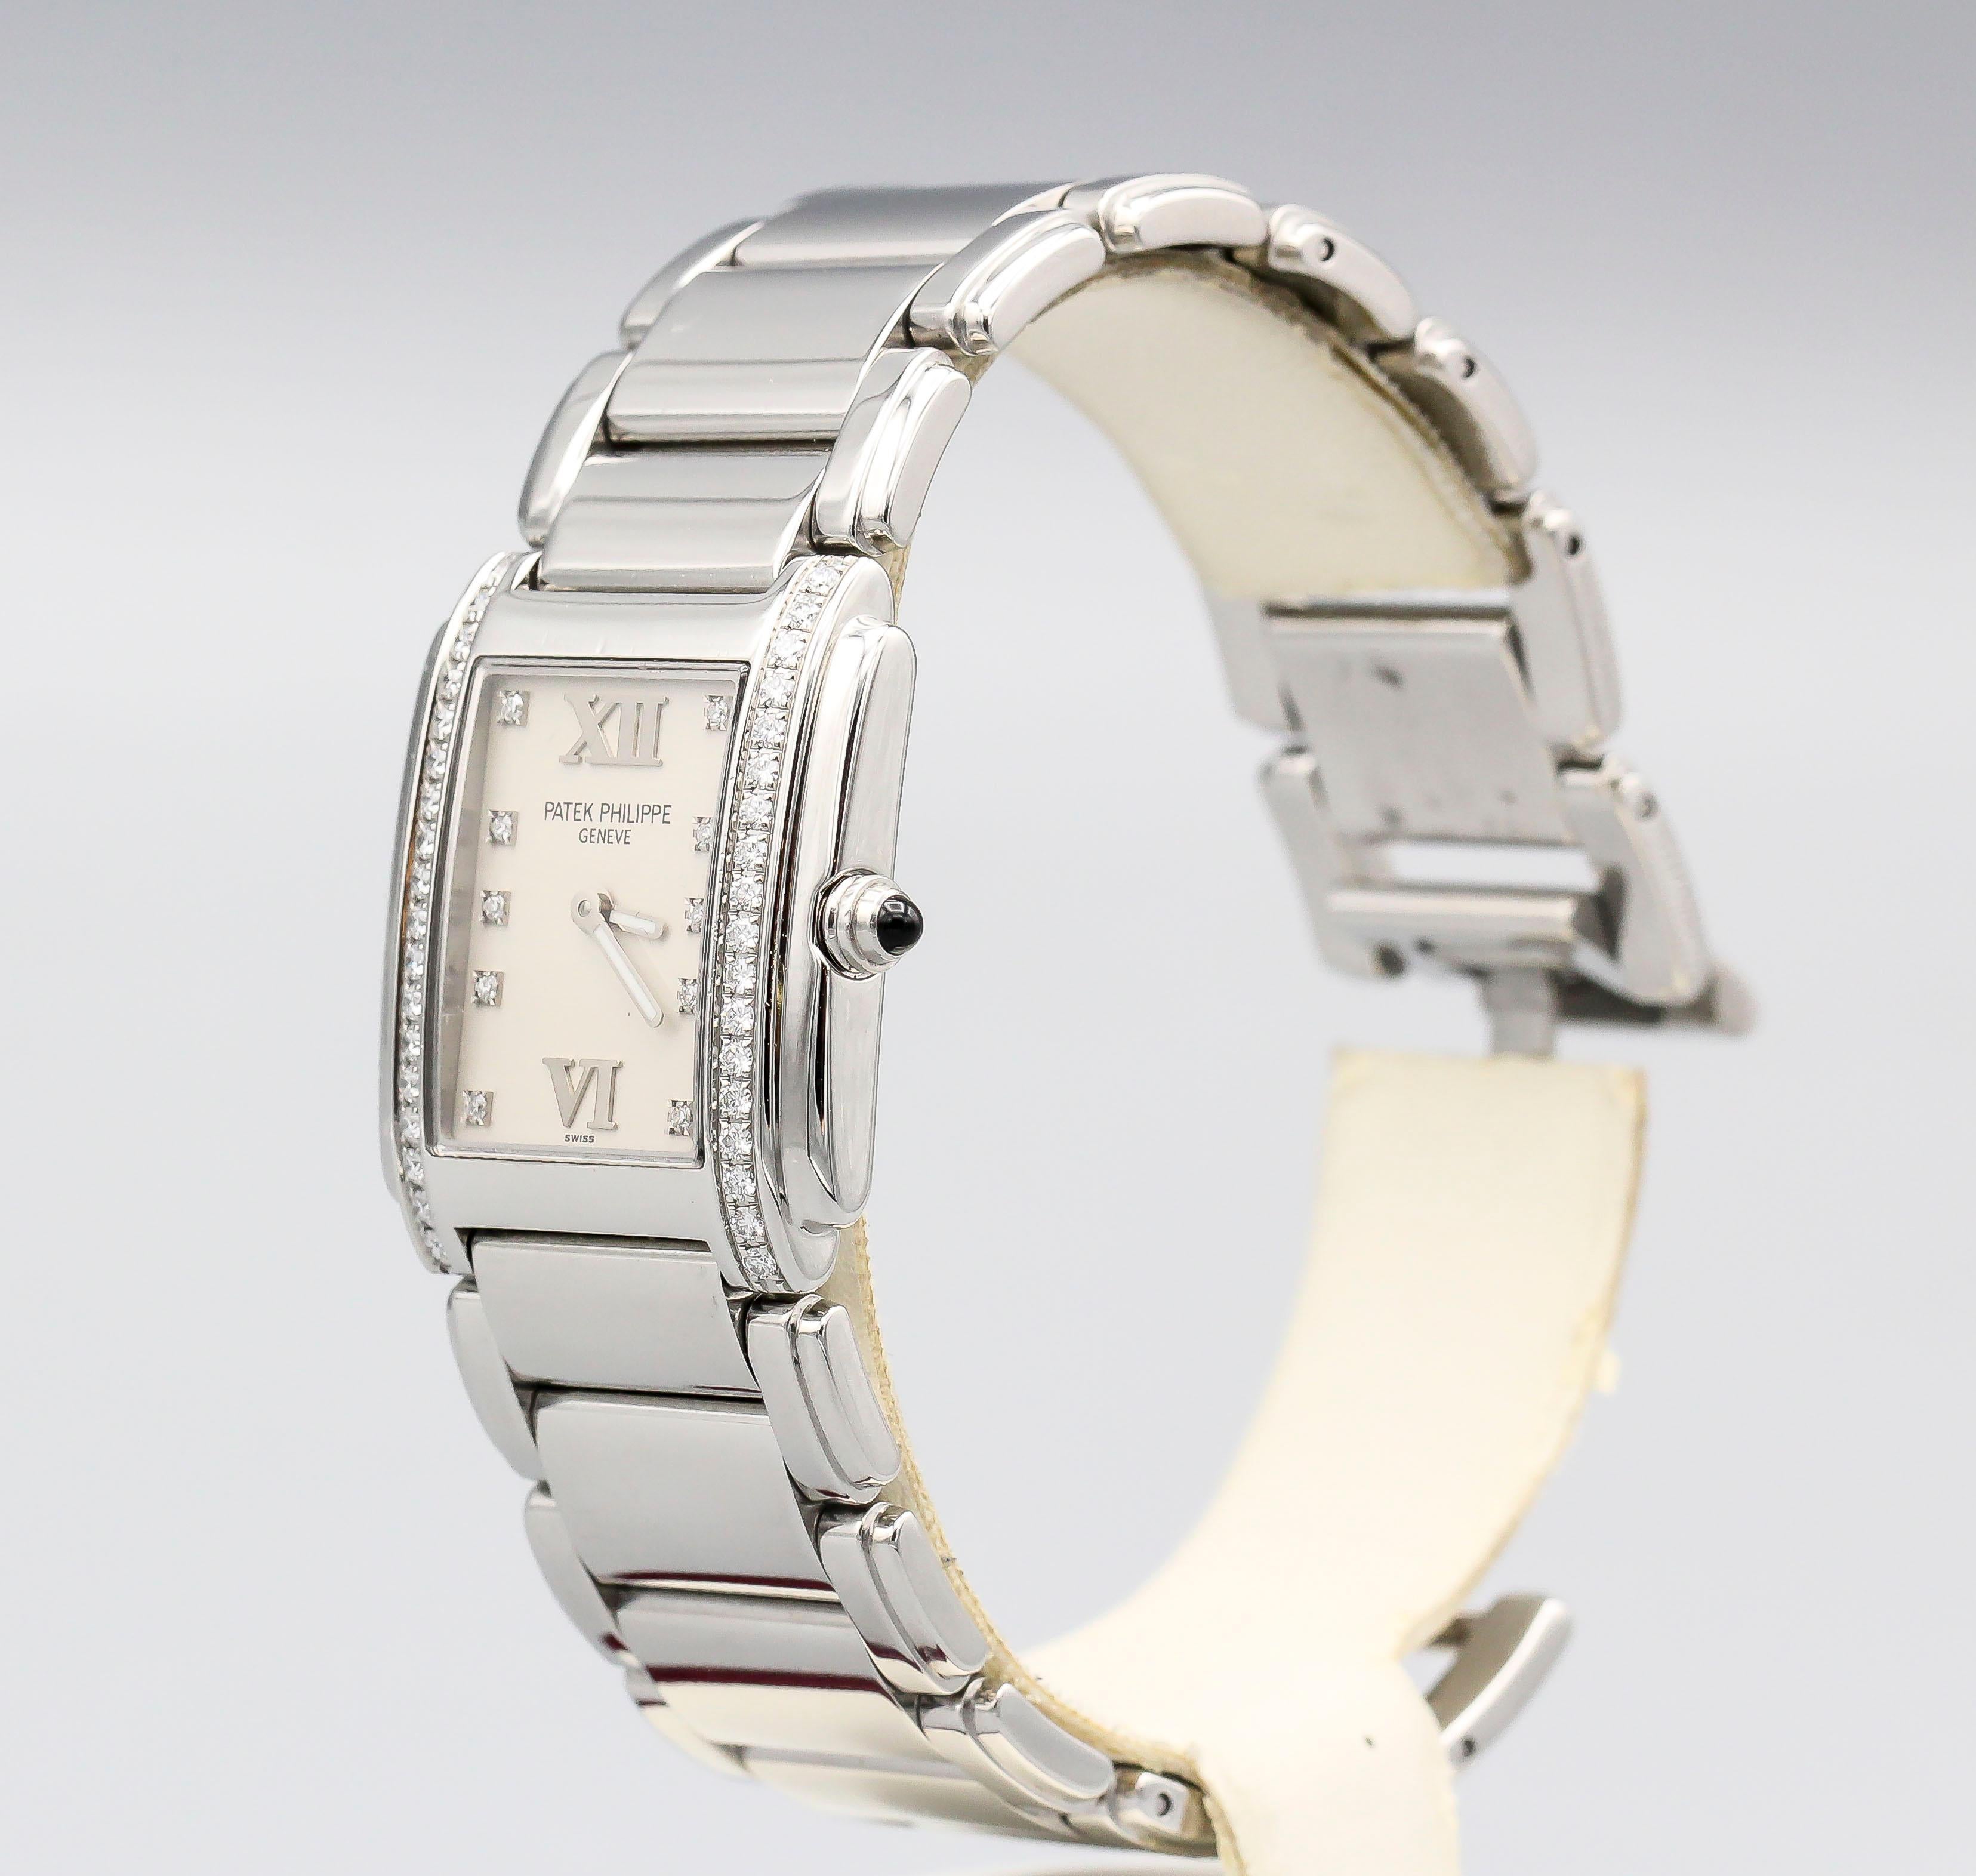 Fine diamond and stainless steel watch from the 